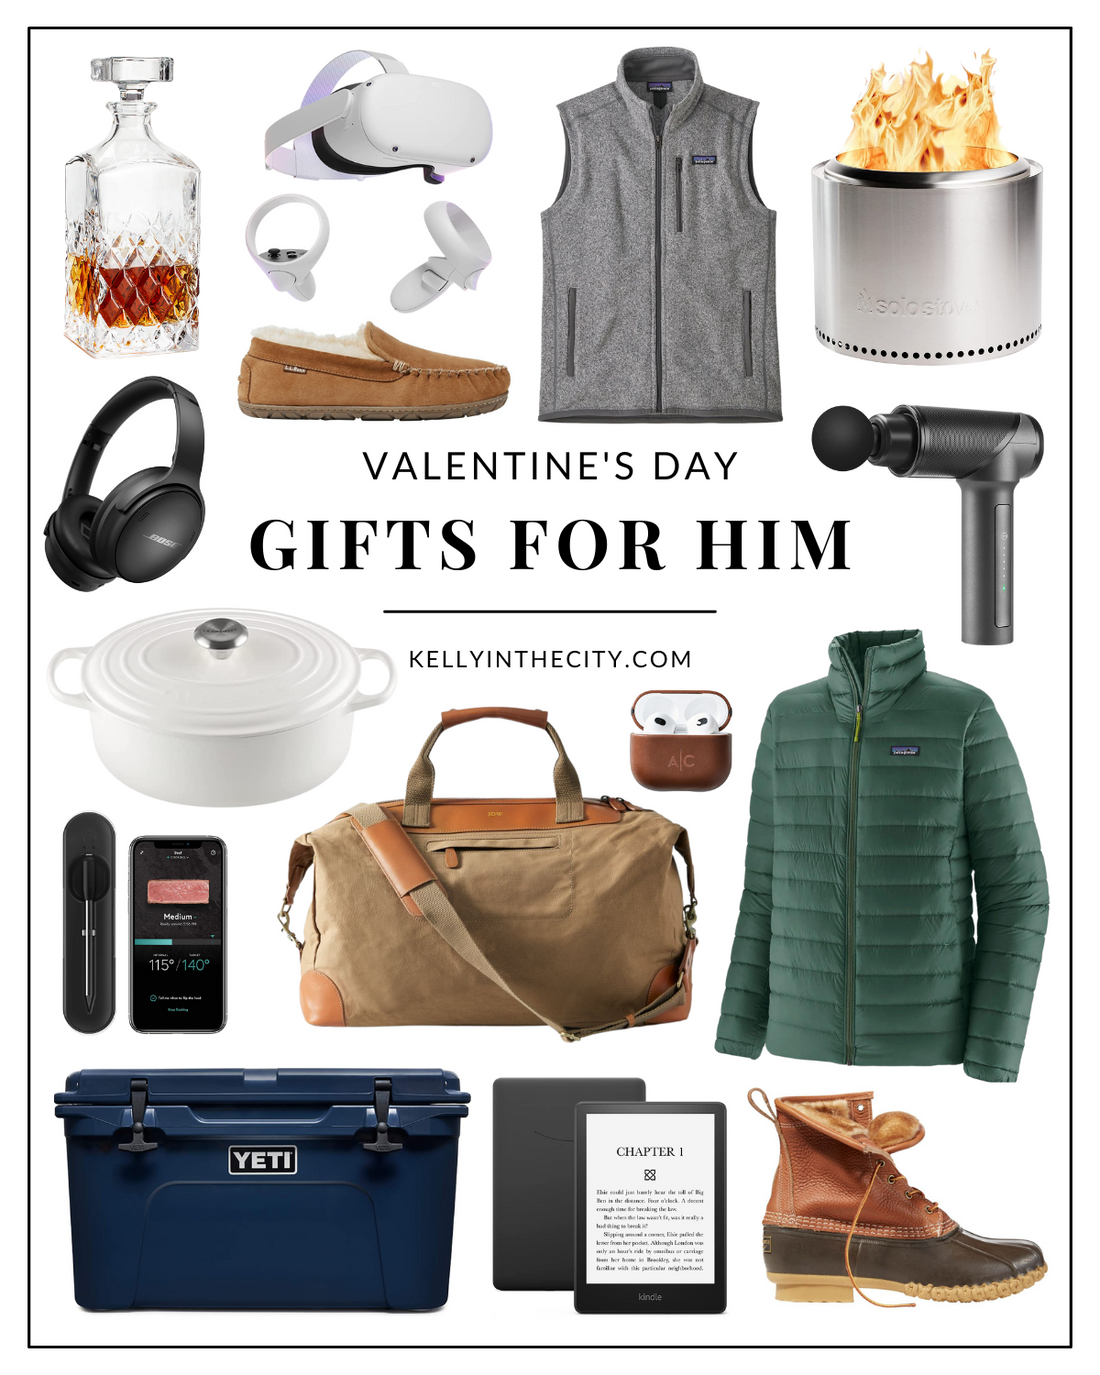 Valentine’s Day Gift Guide for Him